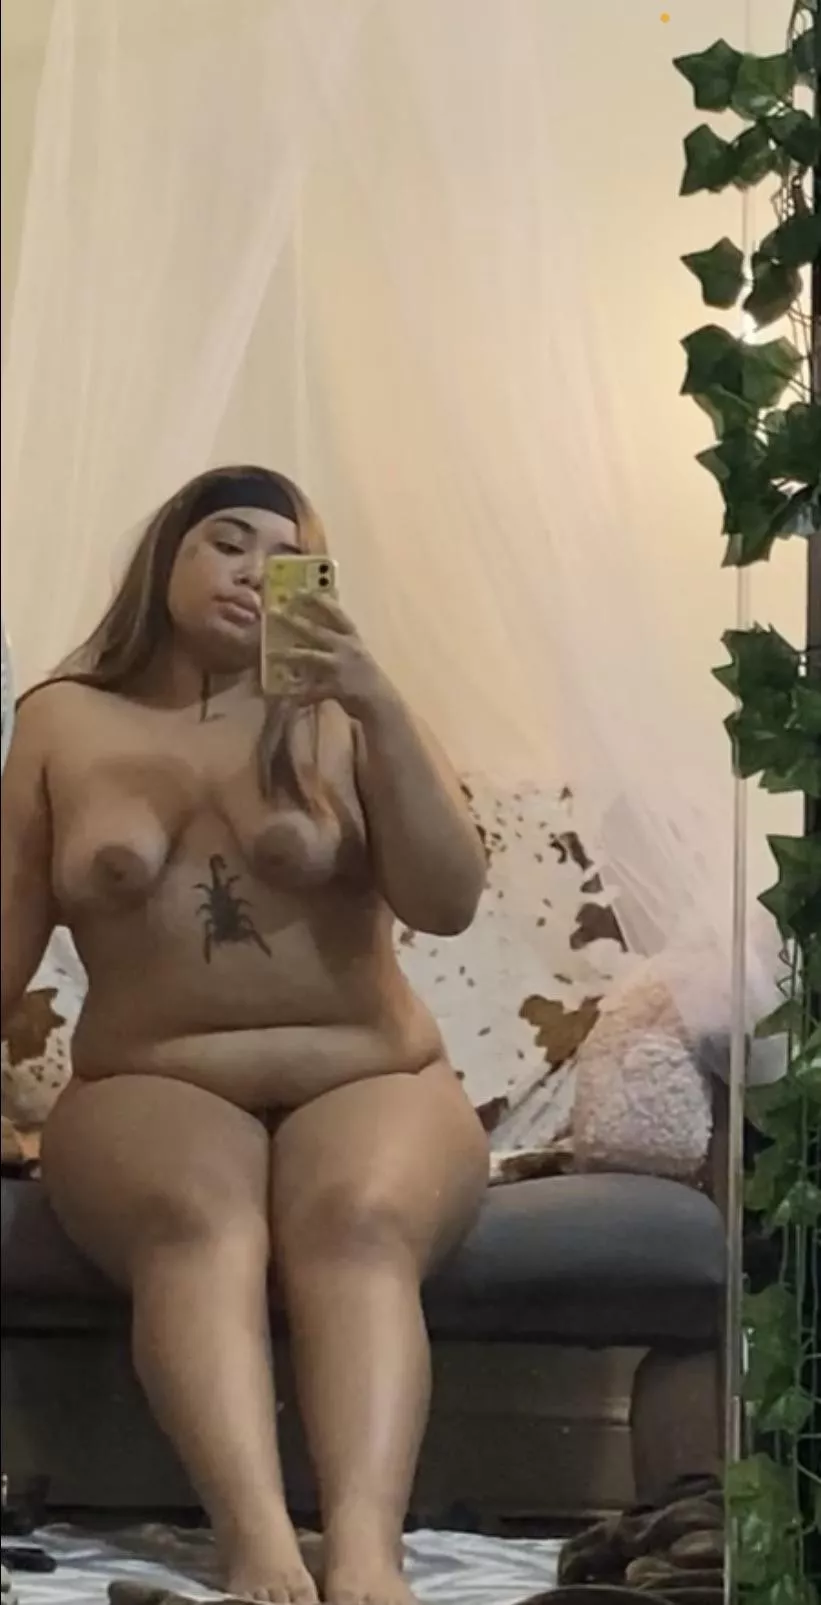 Thick Everywhere Nudes Bbw Chubby Nude Pics Org